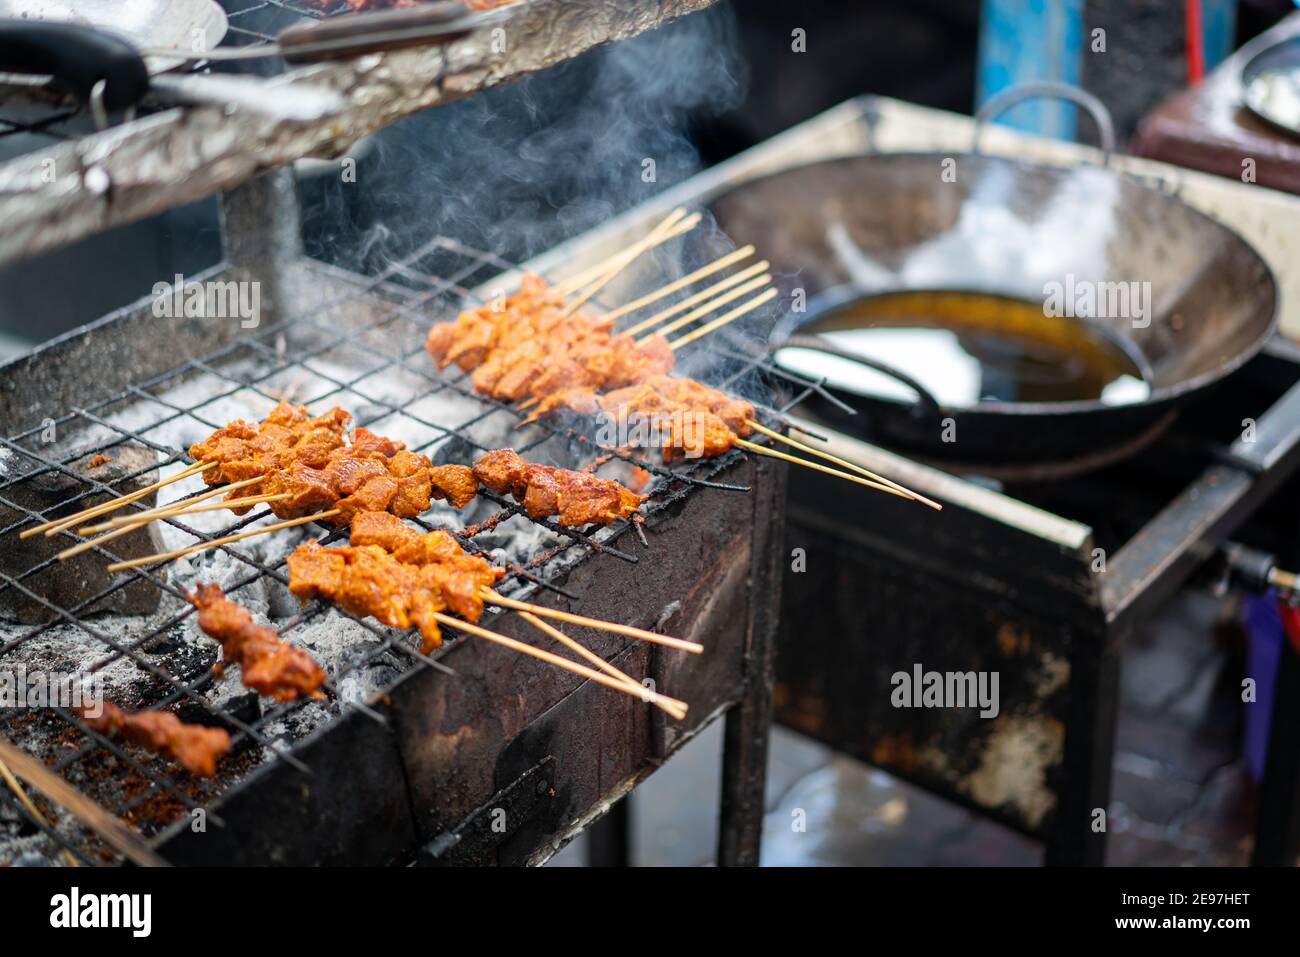 Black African woman cooking and selling street food Stock Photo